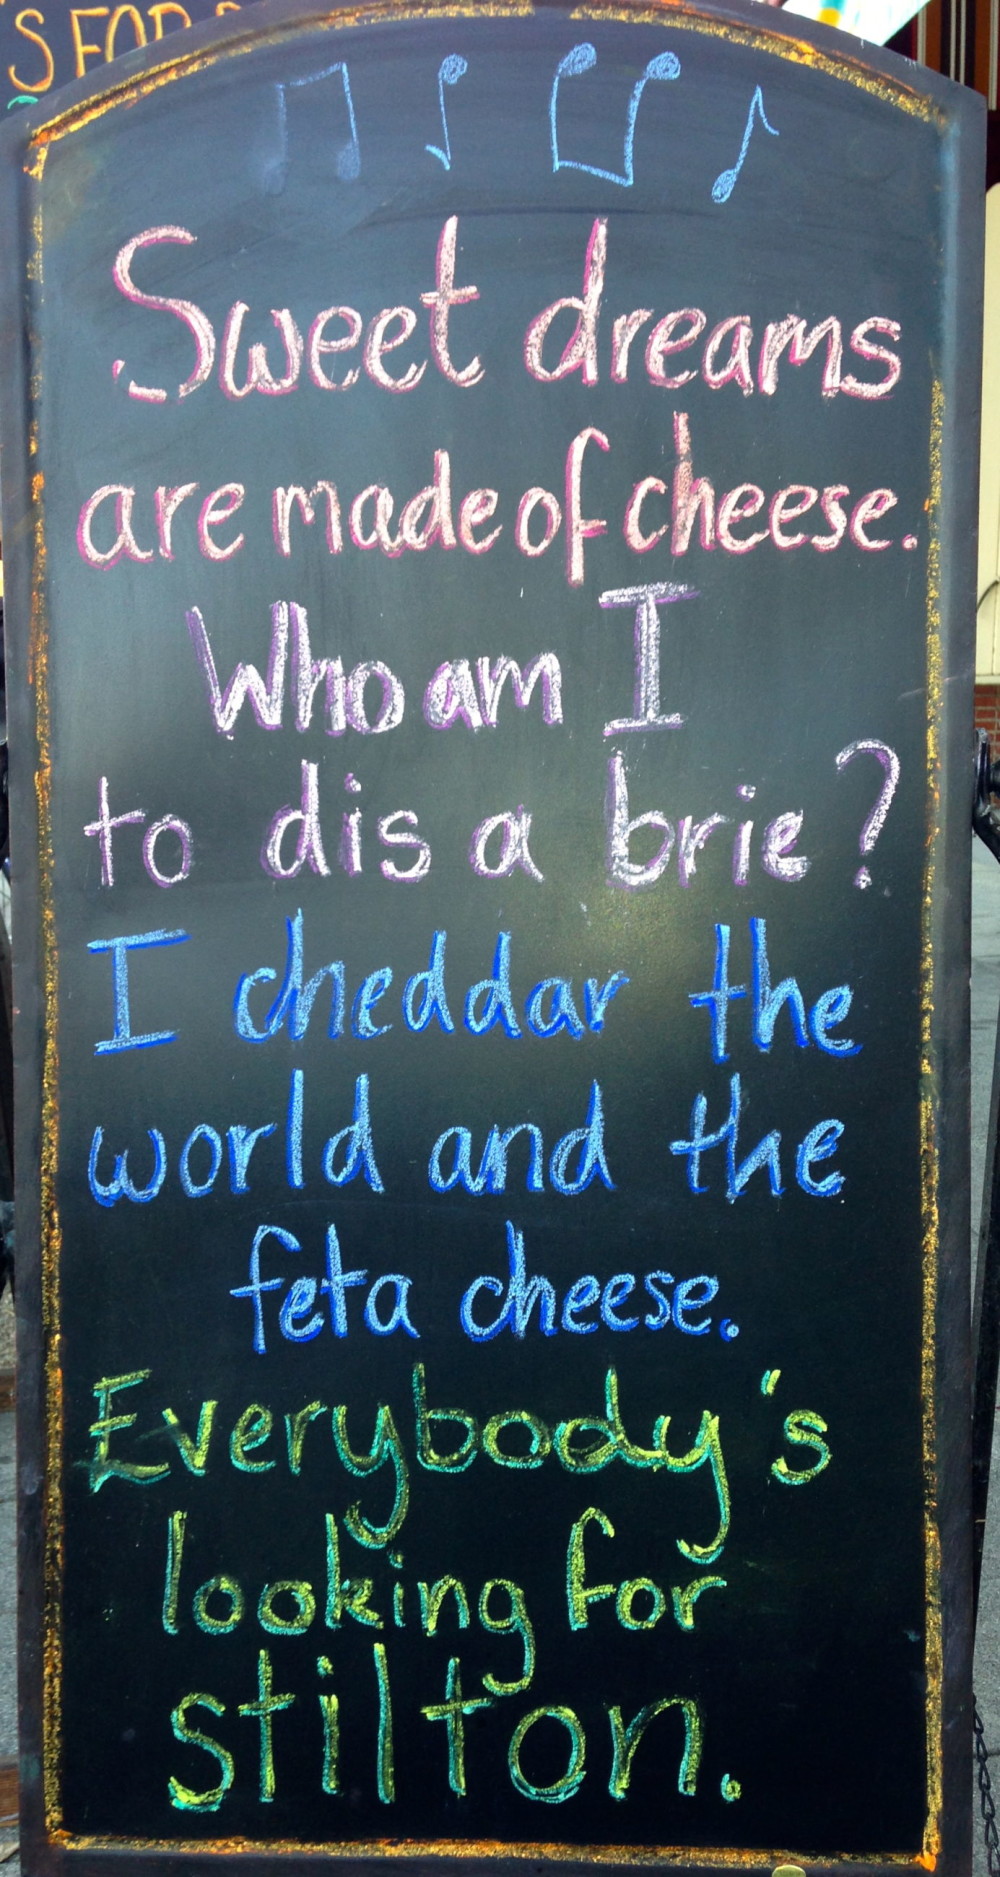 Say CHEESE!  This is the sign in front of the loveliest cheese shop.